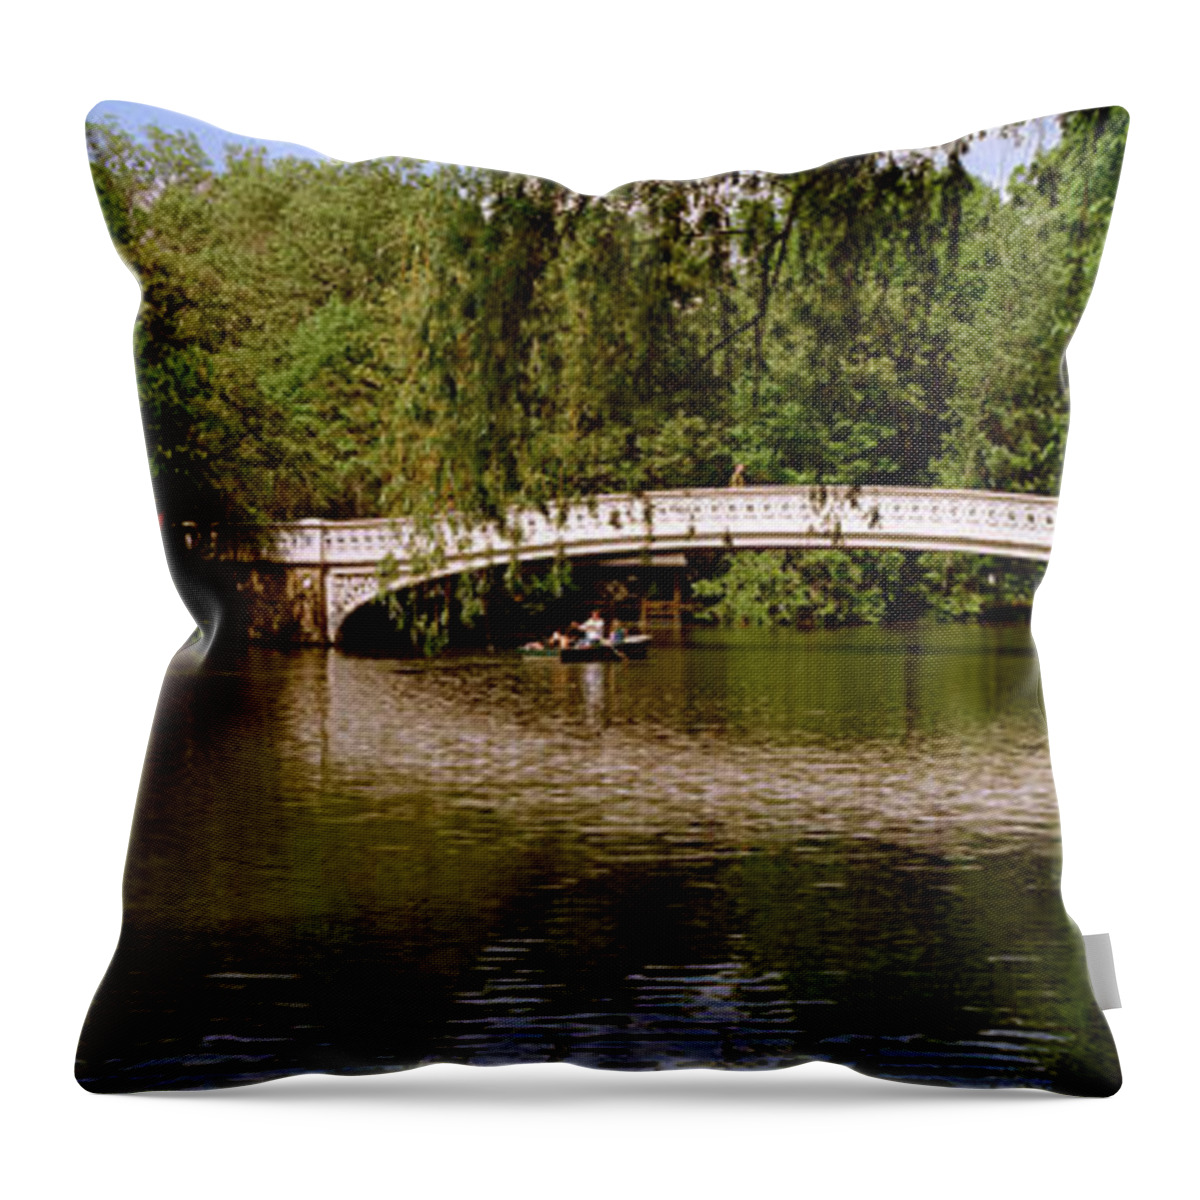 Photography Throw Pillow featuring the photograph Bridge Across A Lake, Central Park by Panoramic Images